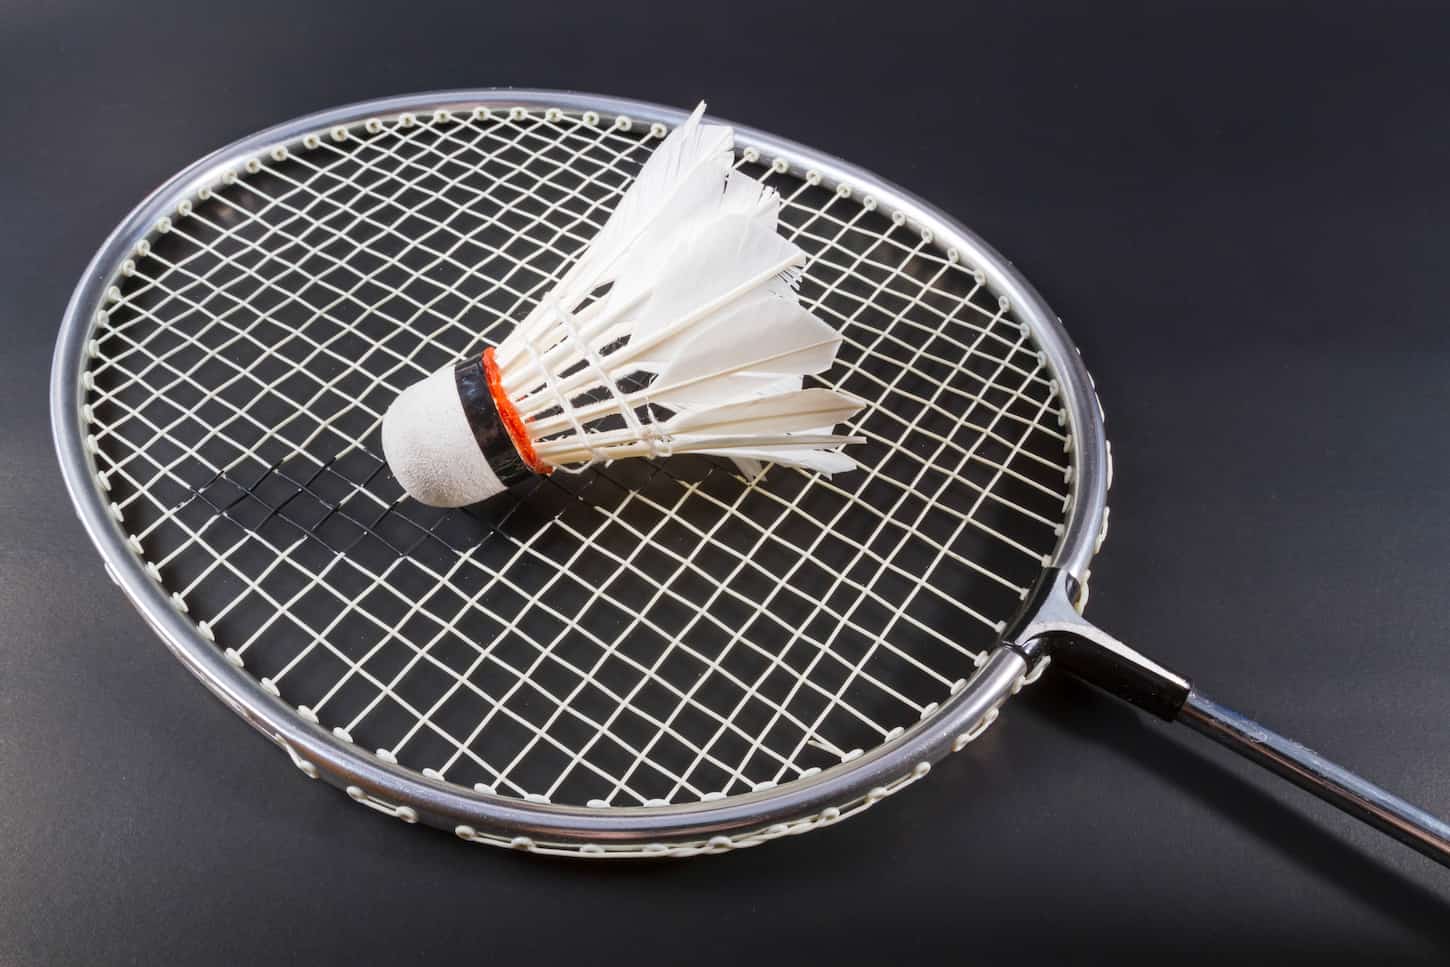 An image of a Shuttlecock and a badminton racket on dark background.